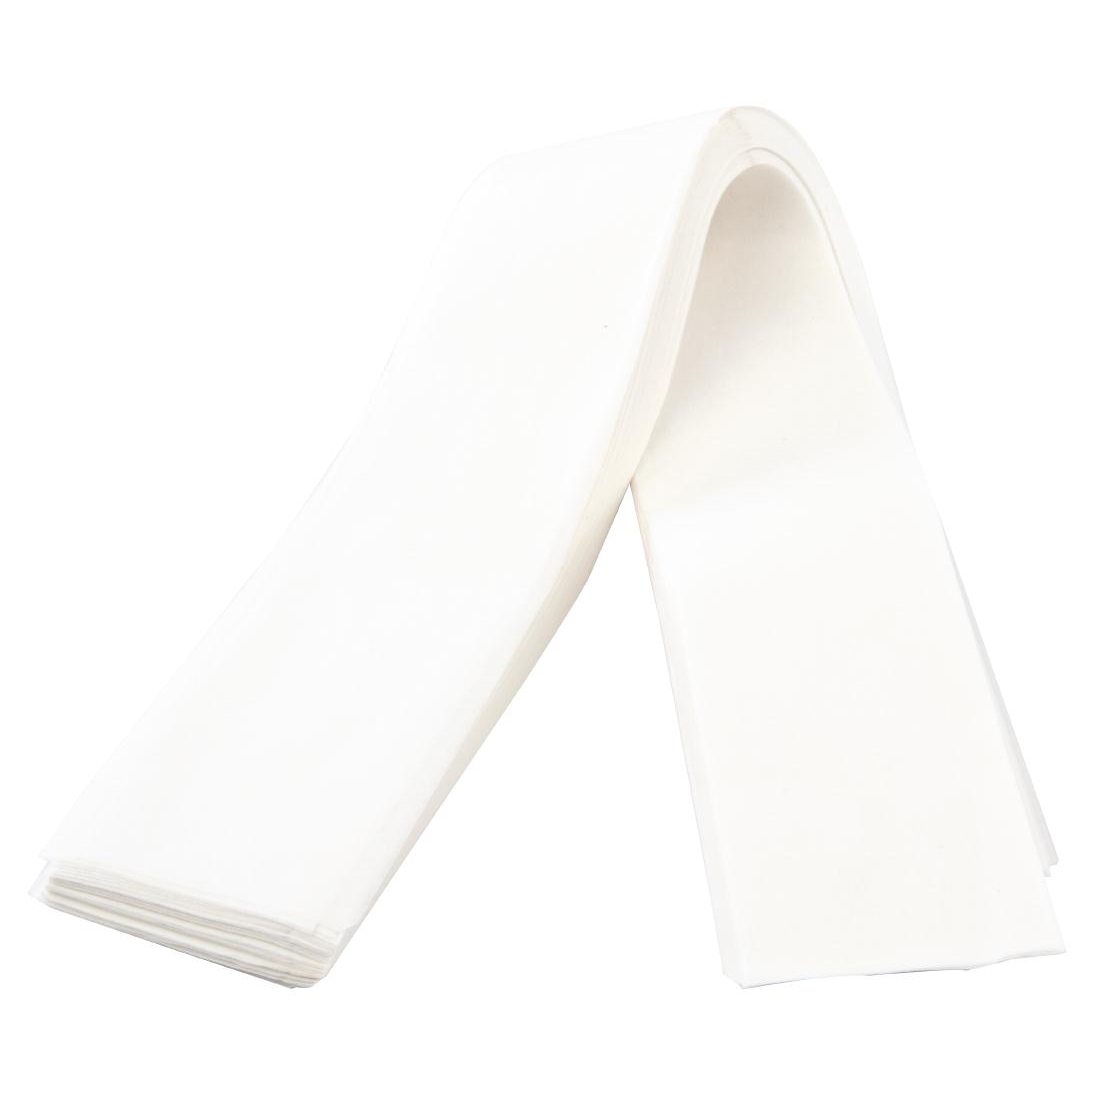 Waring Filter Papers ref 501289